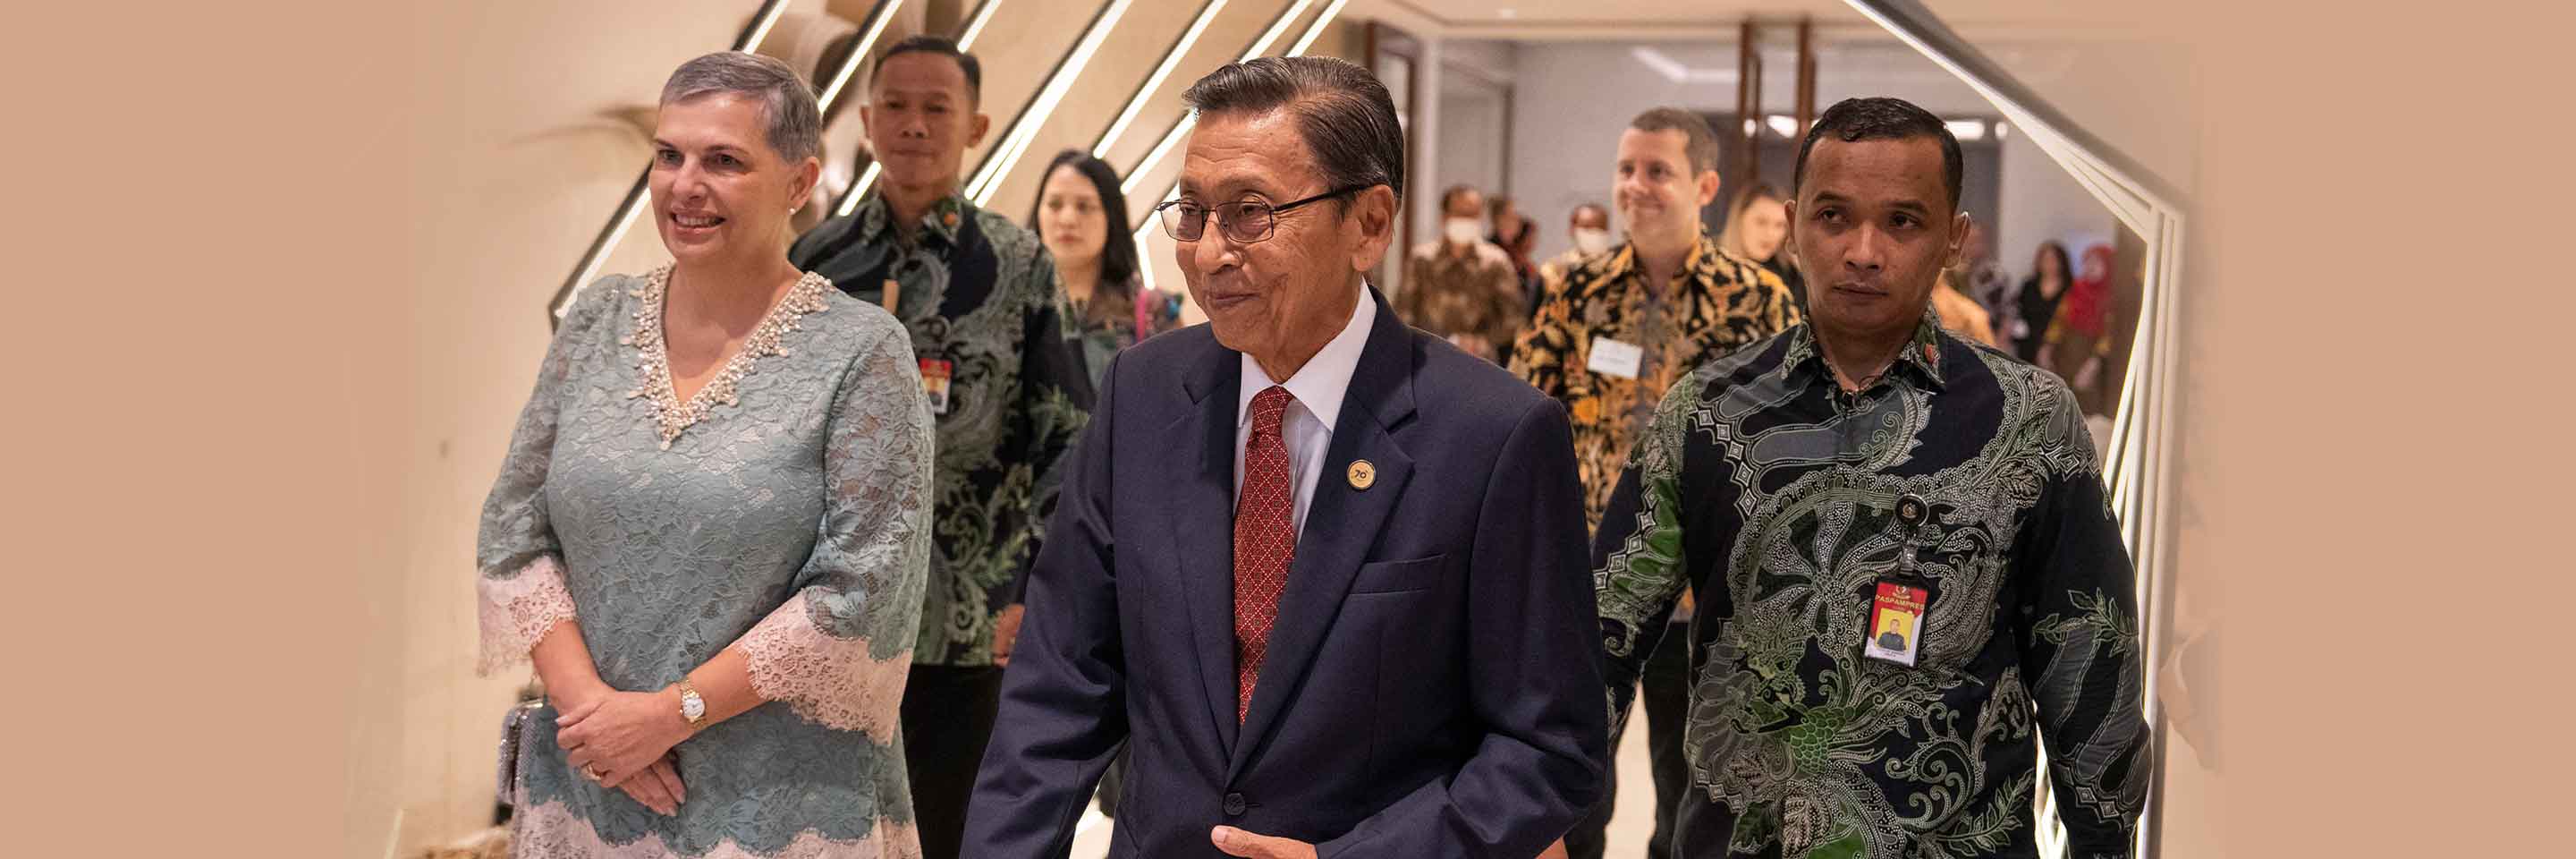 Colombo Plan alumnus and former Vice President of Indonesia, Prof Dr Boediono, graces the Alumni Gala Dinner in Jakarta to mark 70 years since the first cohort of Colombo Plan scholarship recipients from Indonesia arrived in Australia.